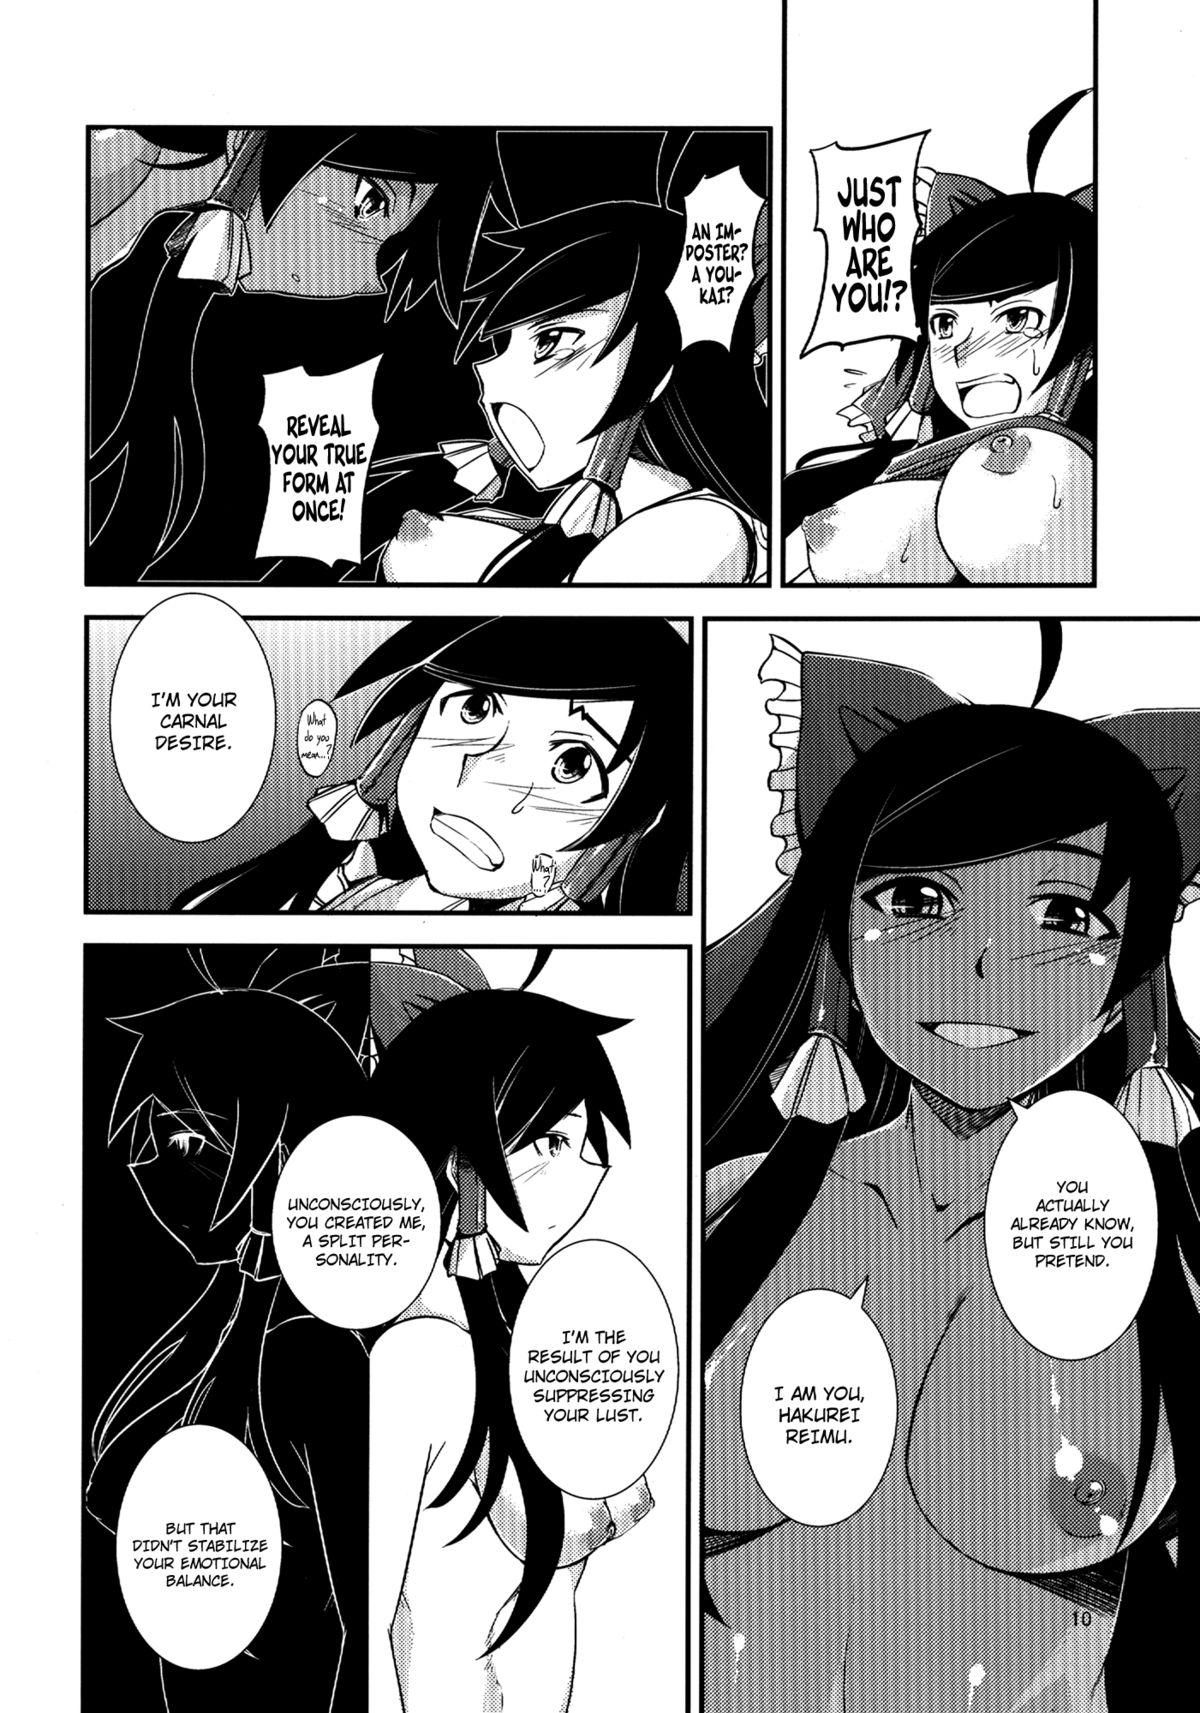 Tribute The Incident of the Black Shrine Maiden - Touhou project Porno Amateur - Page 10